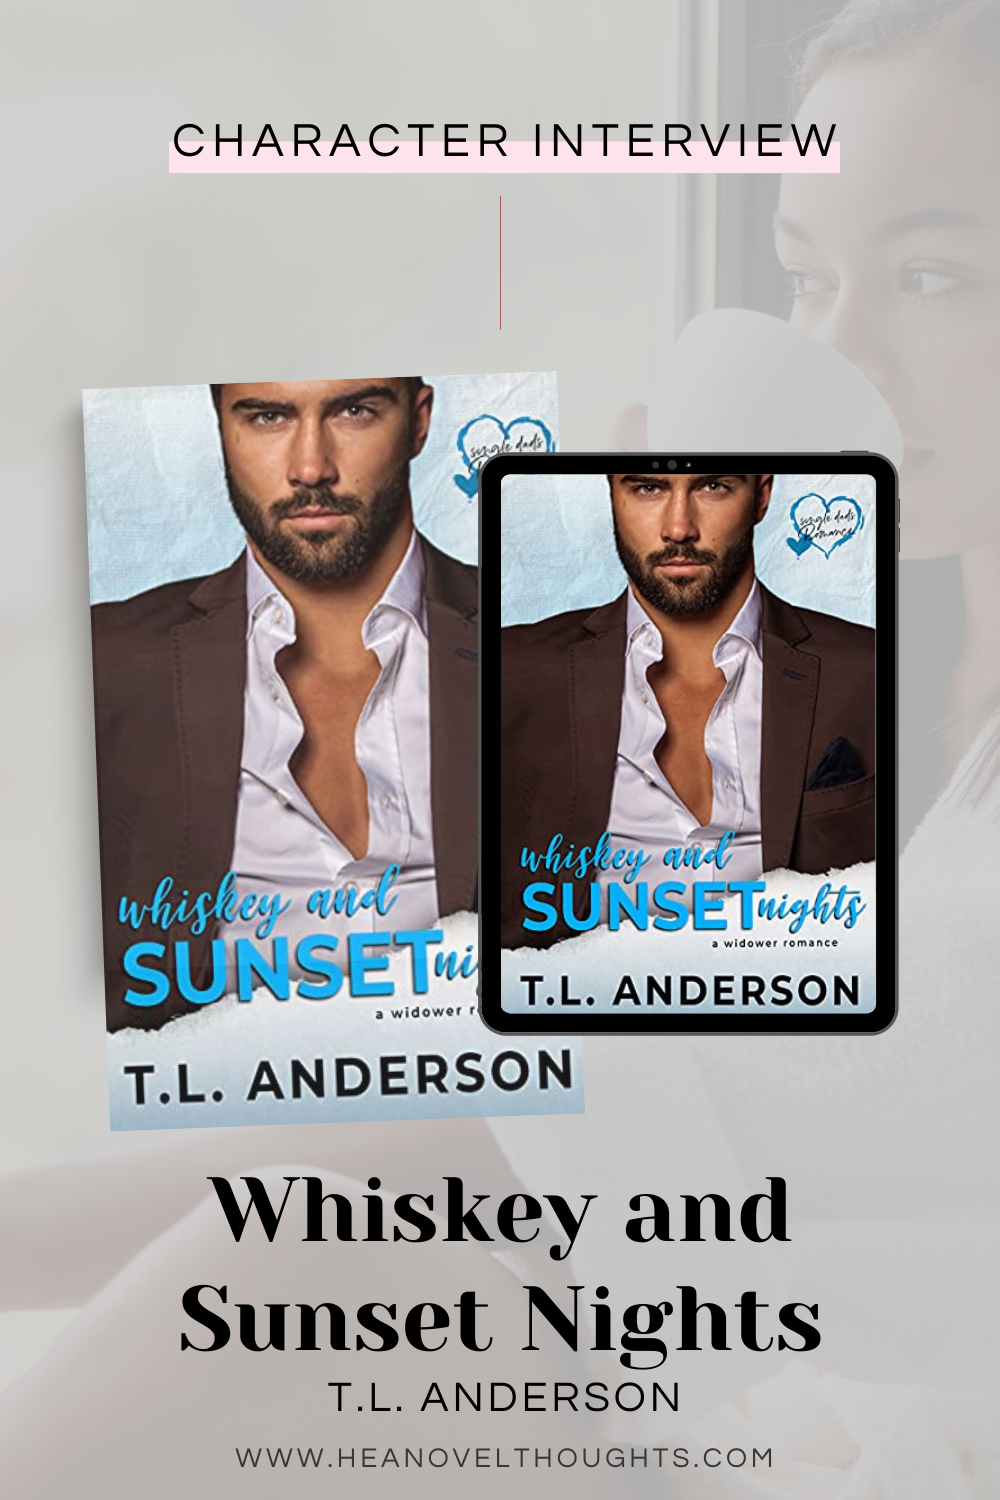 Interview with widower, Grayson Pierce, from Whiskey and Sunset Nights by T.L. Anderson